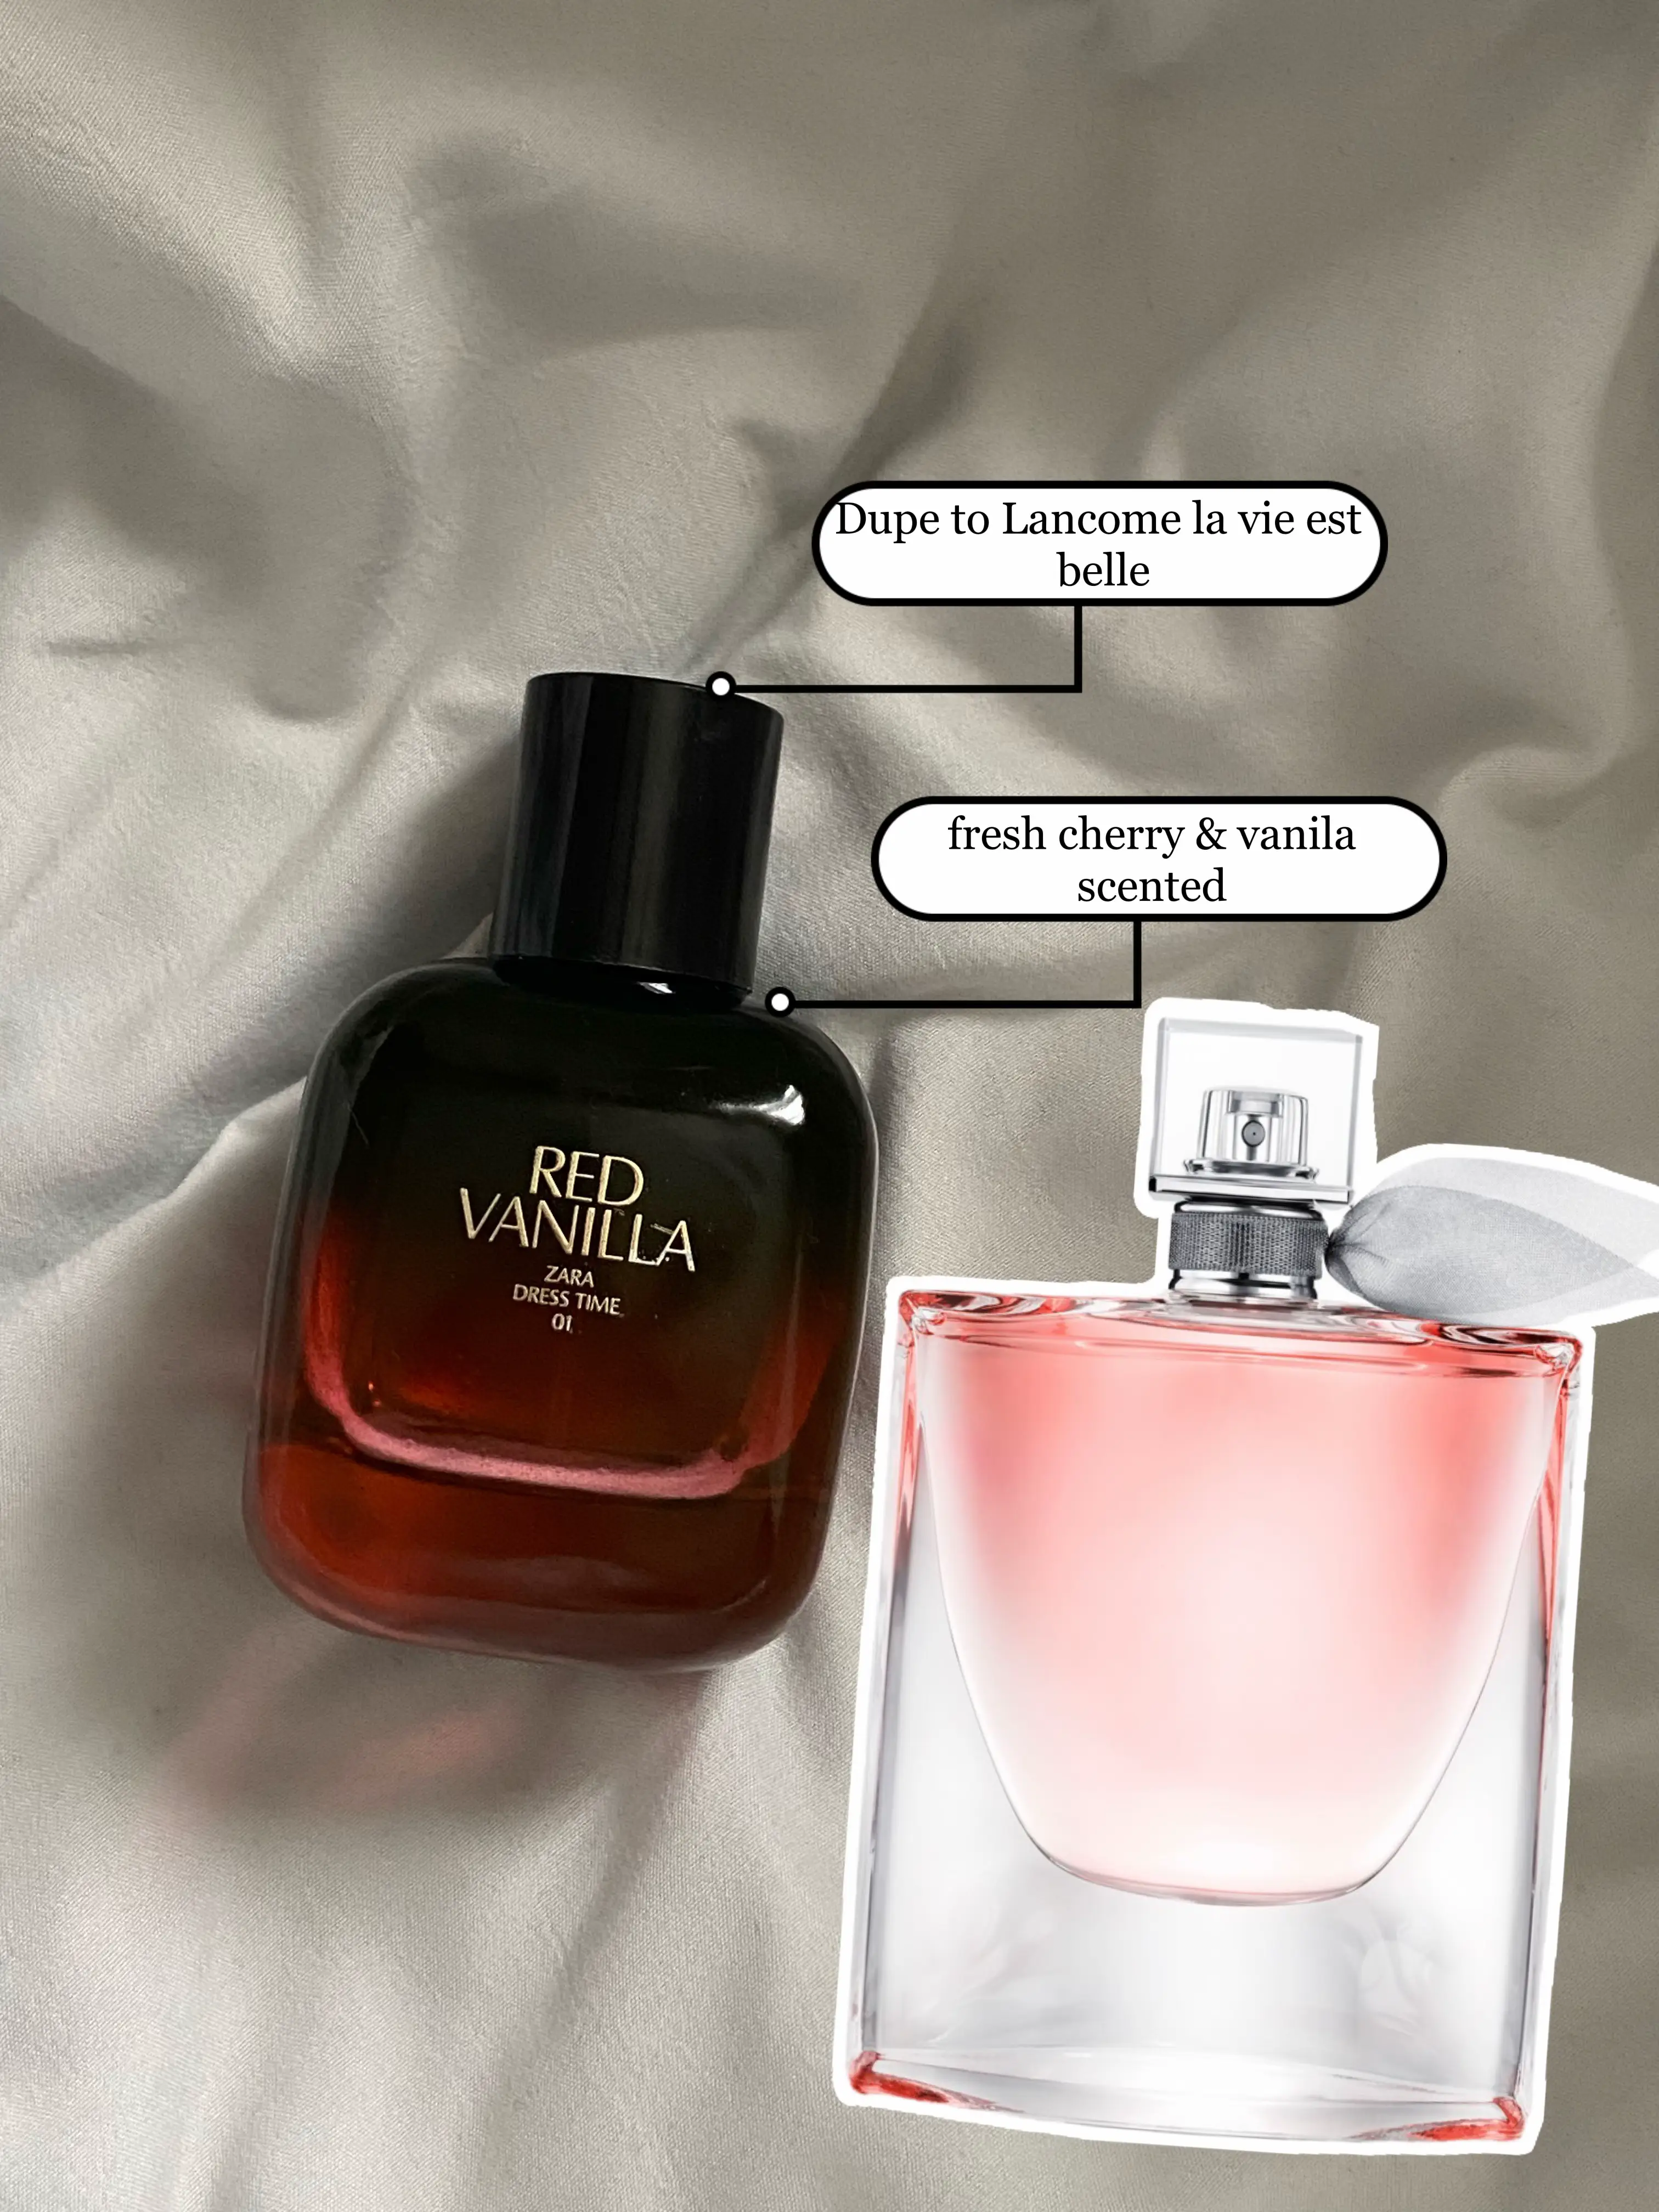 ZARA perfume dupe, Gallery posted by Deanna